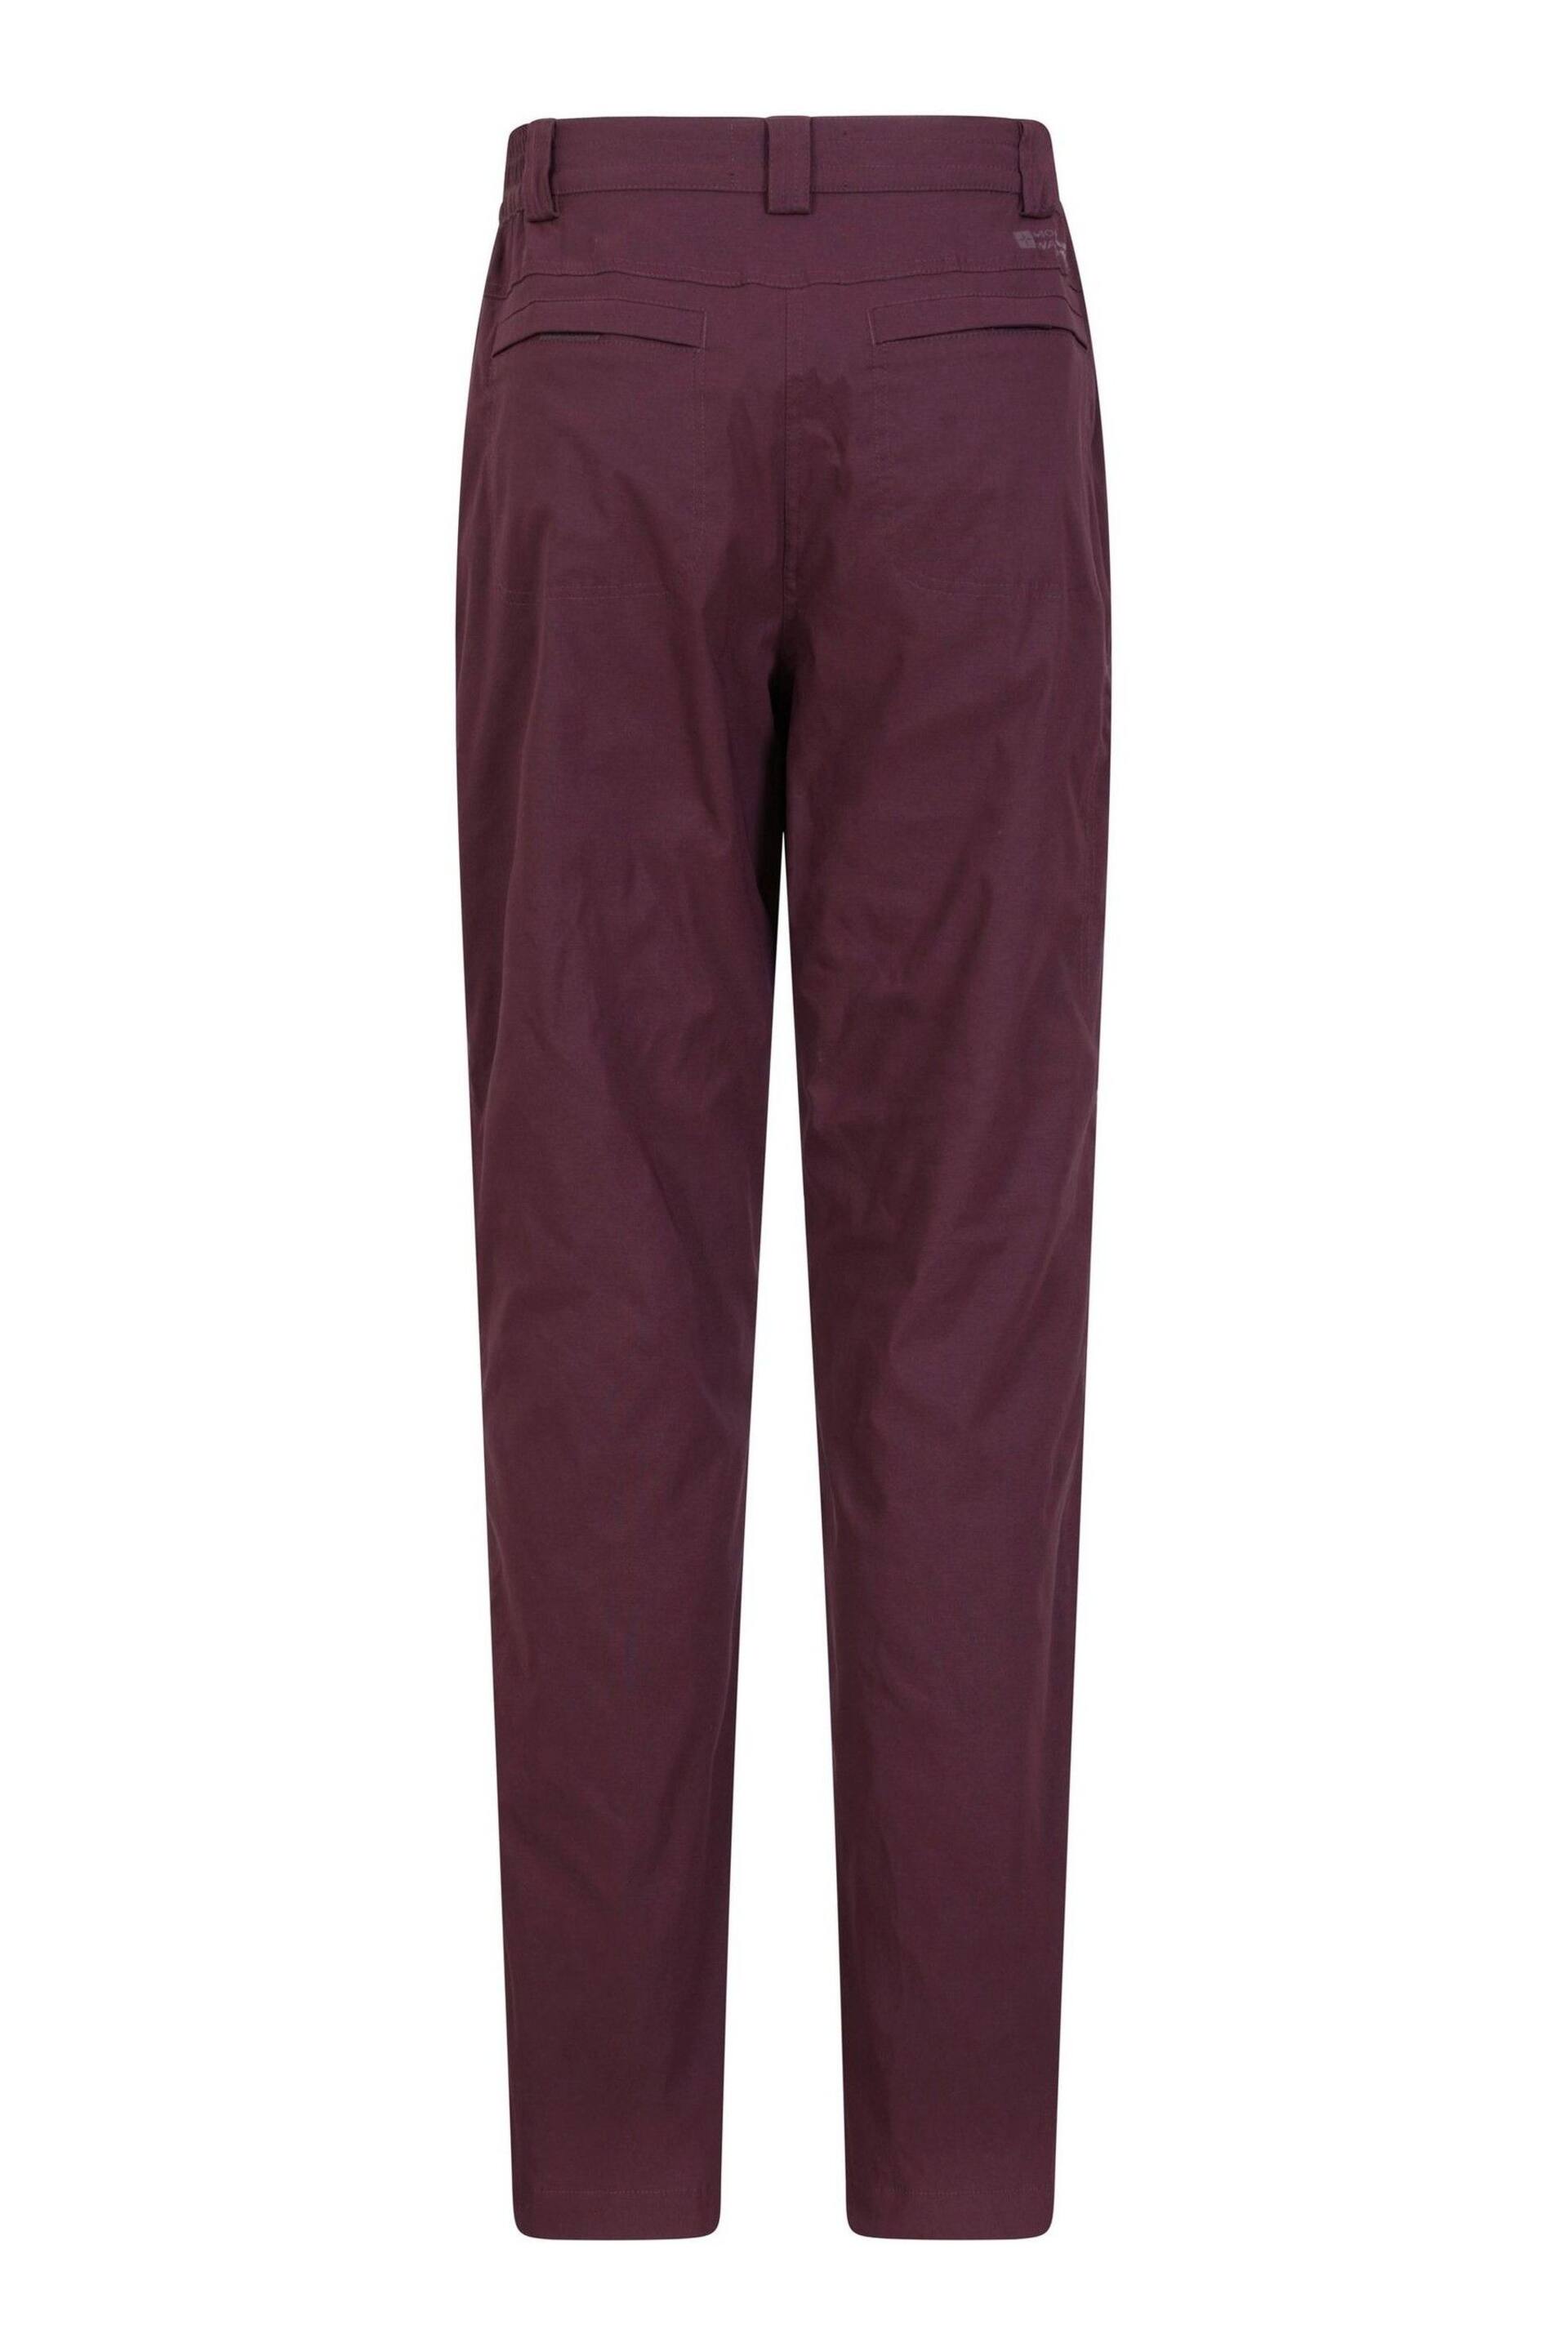 Mountain Warehouse Dark Brown Winter Hiker Stretch Womens Trousers - Image 2 of 5